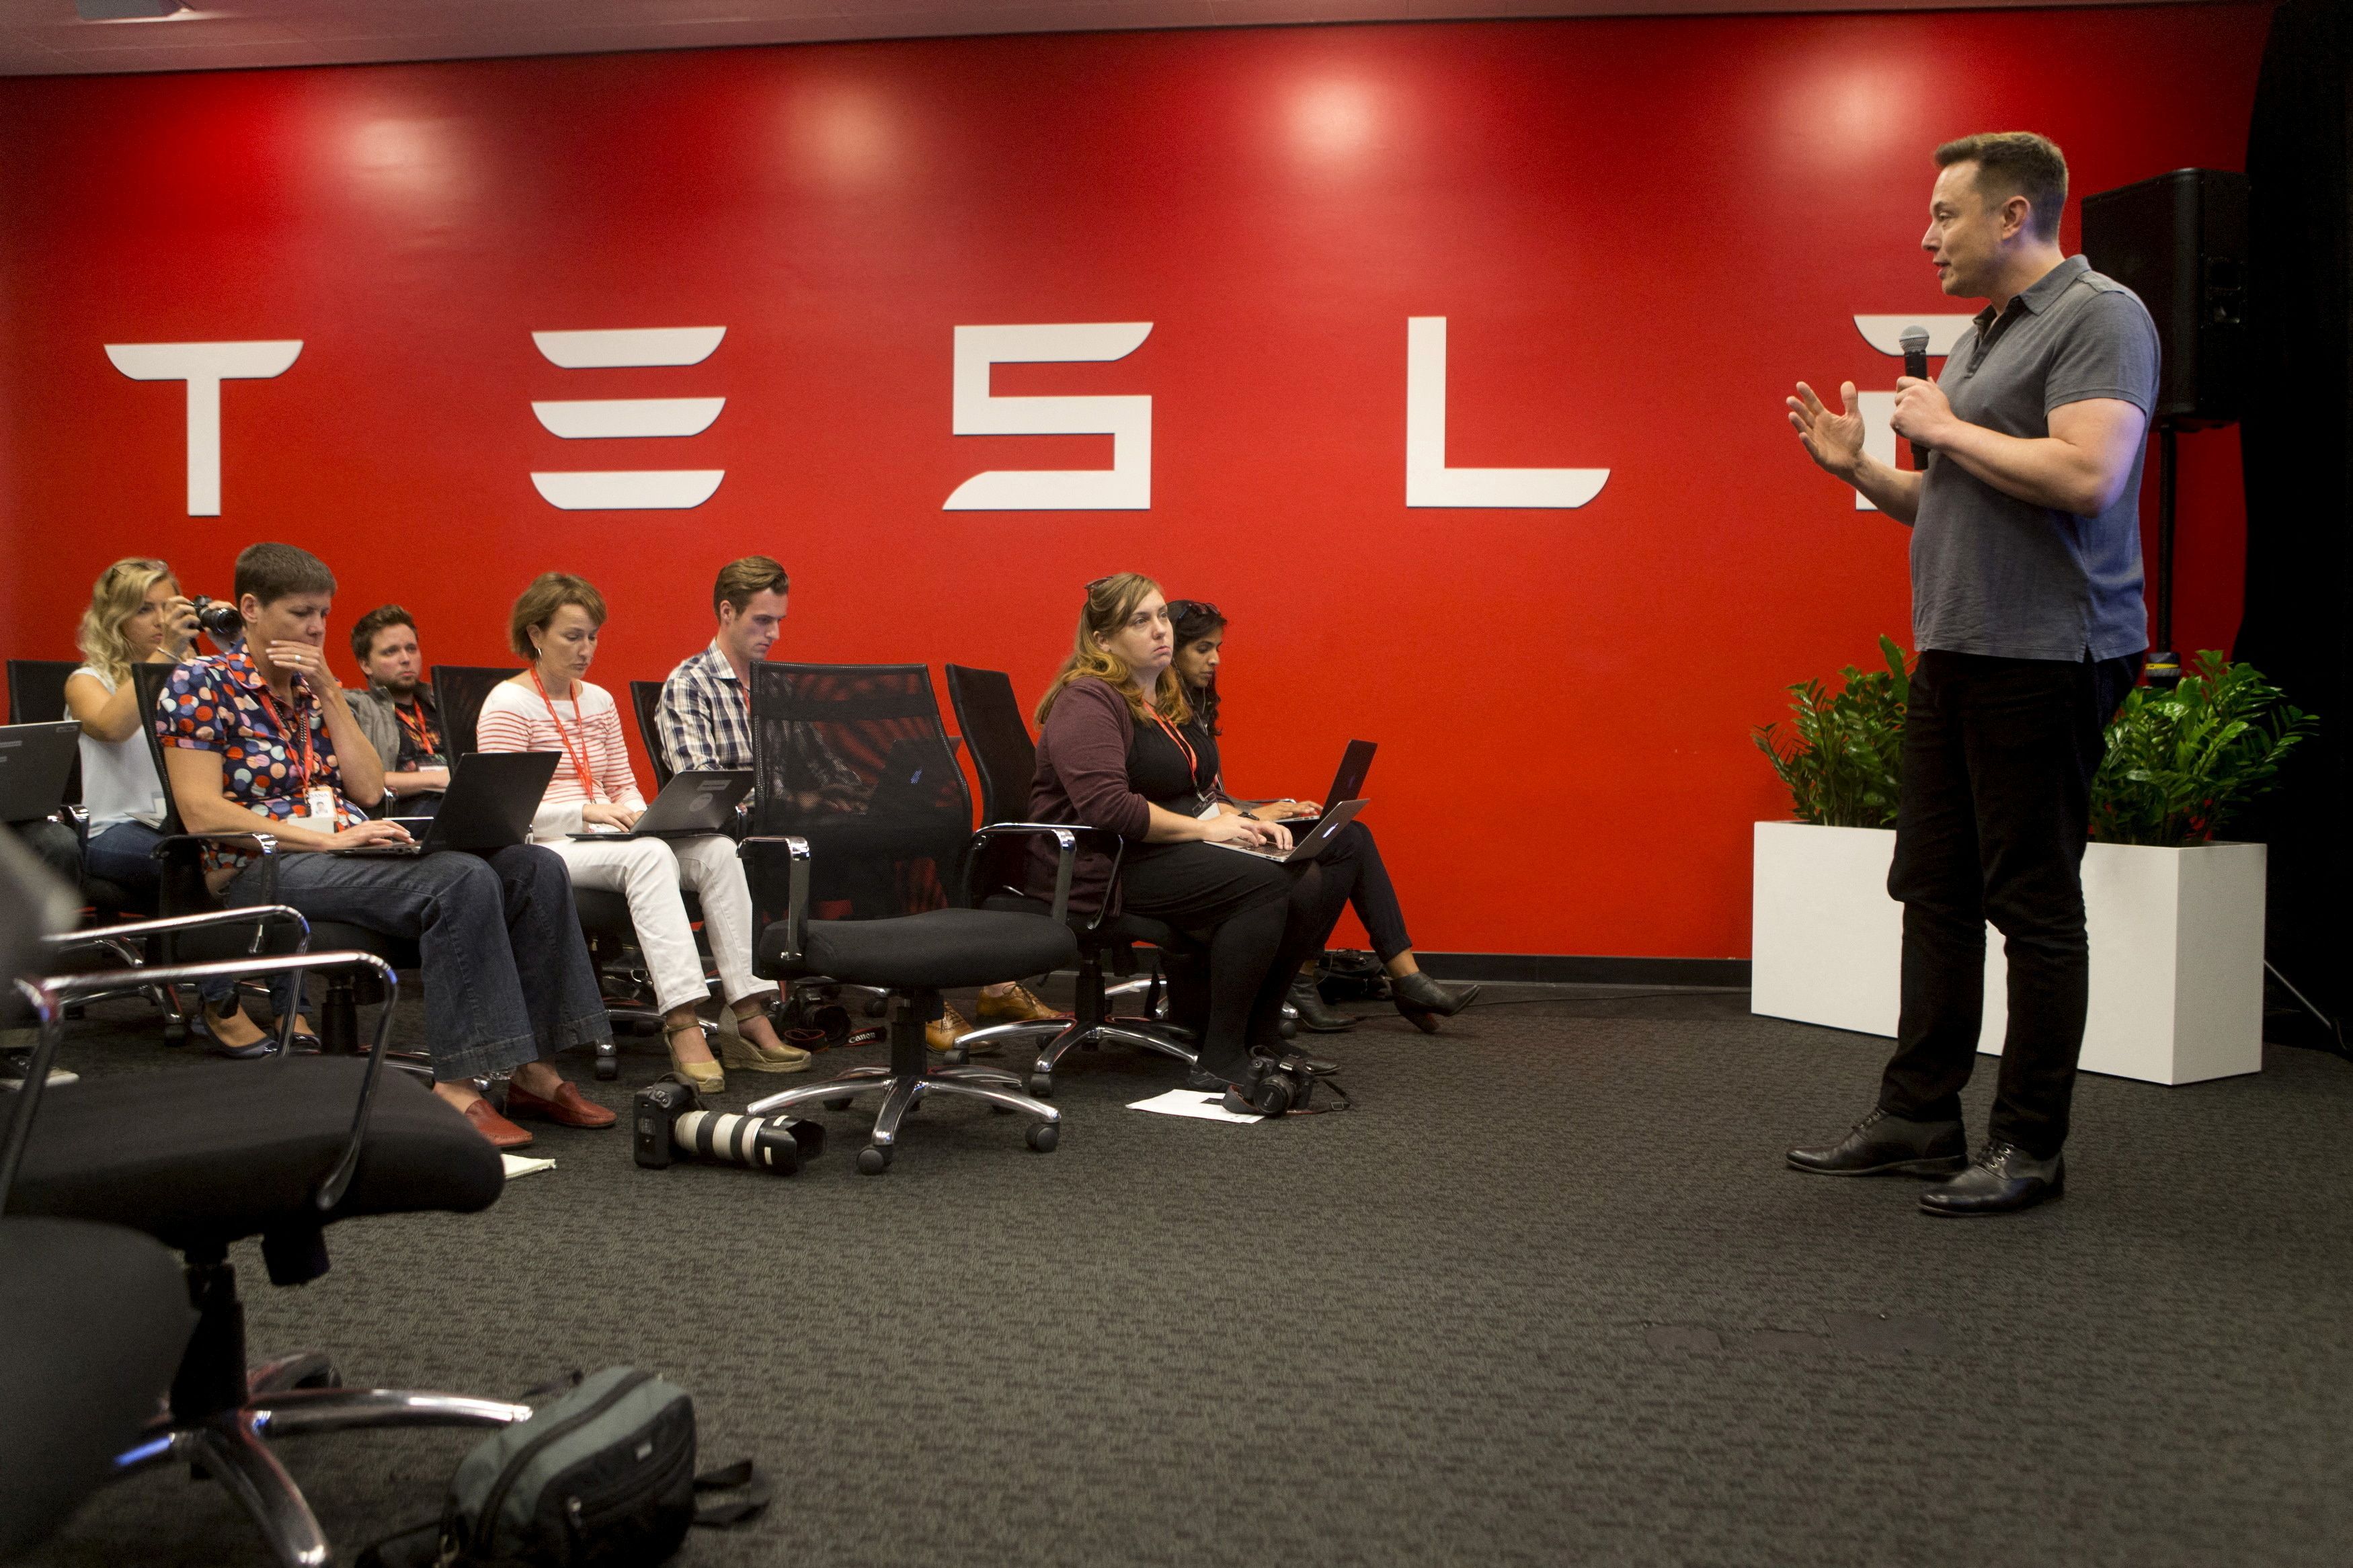 Tesla CEO Elon Musk speaks about new Autopilot features during a Tesla event in Palo Alto